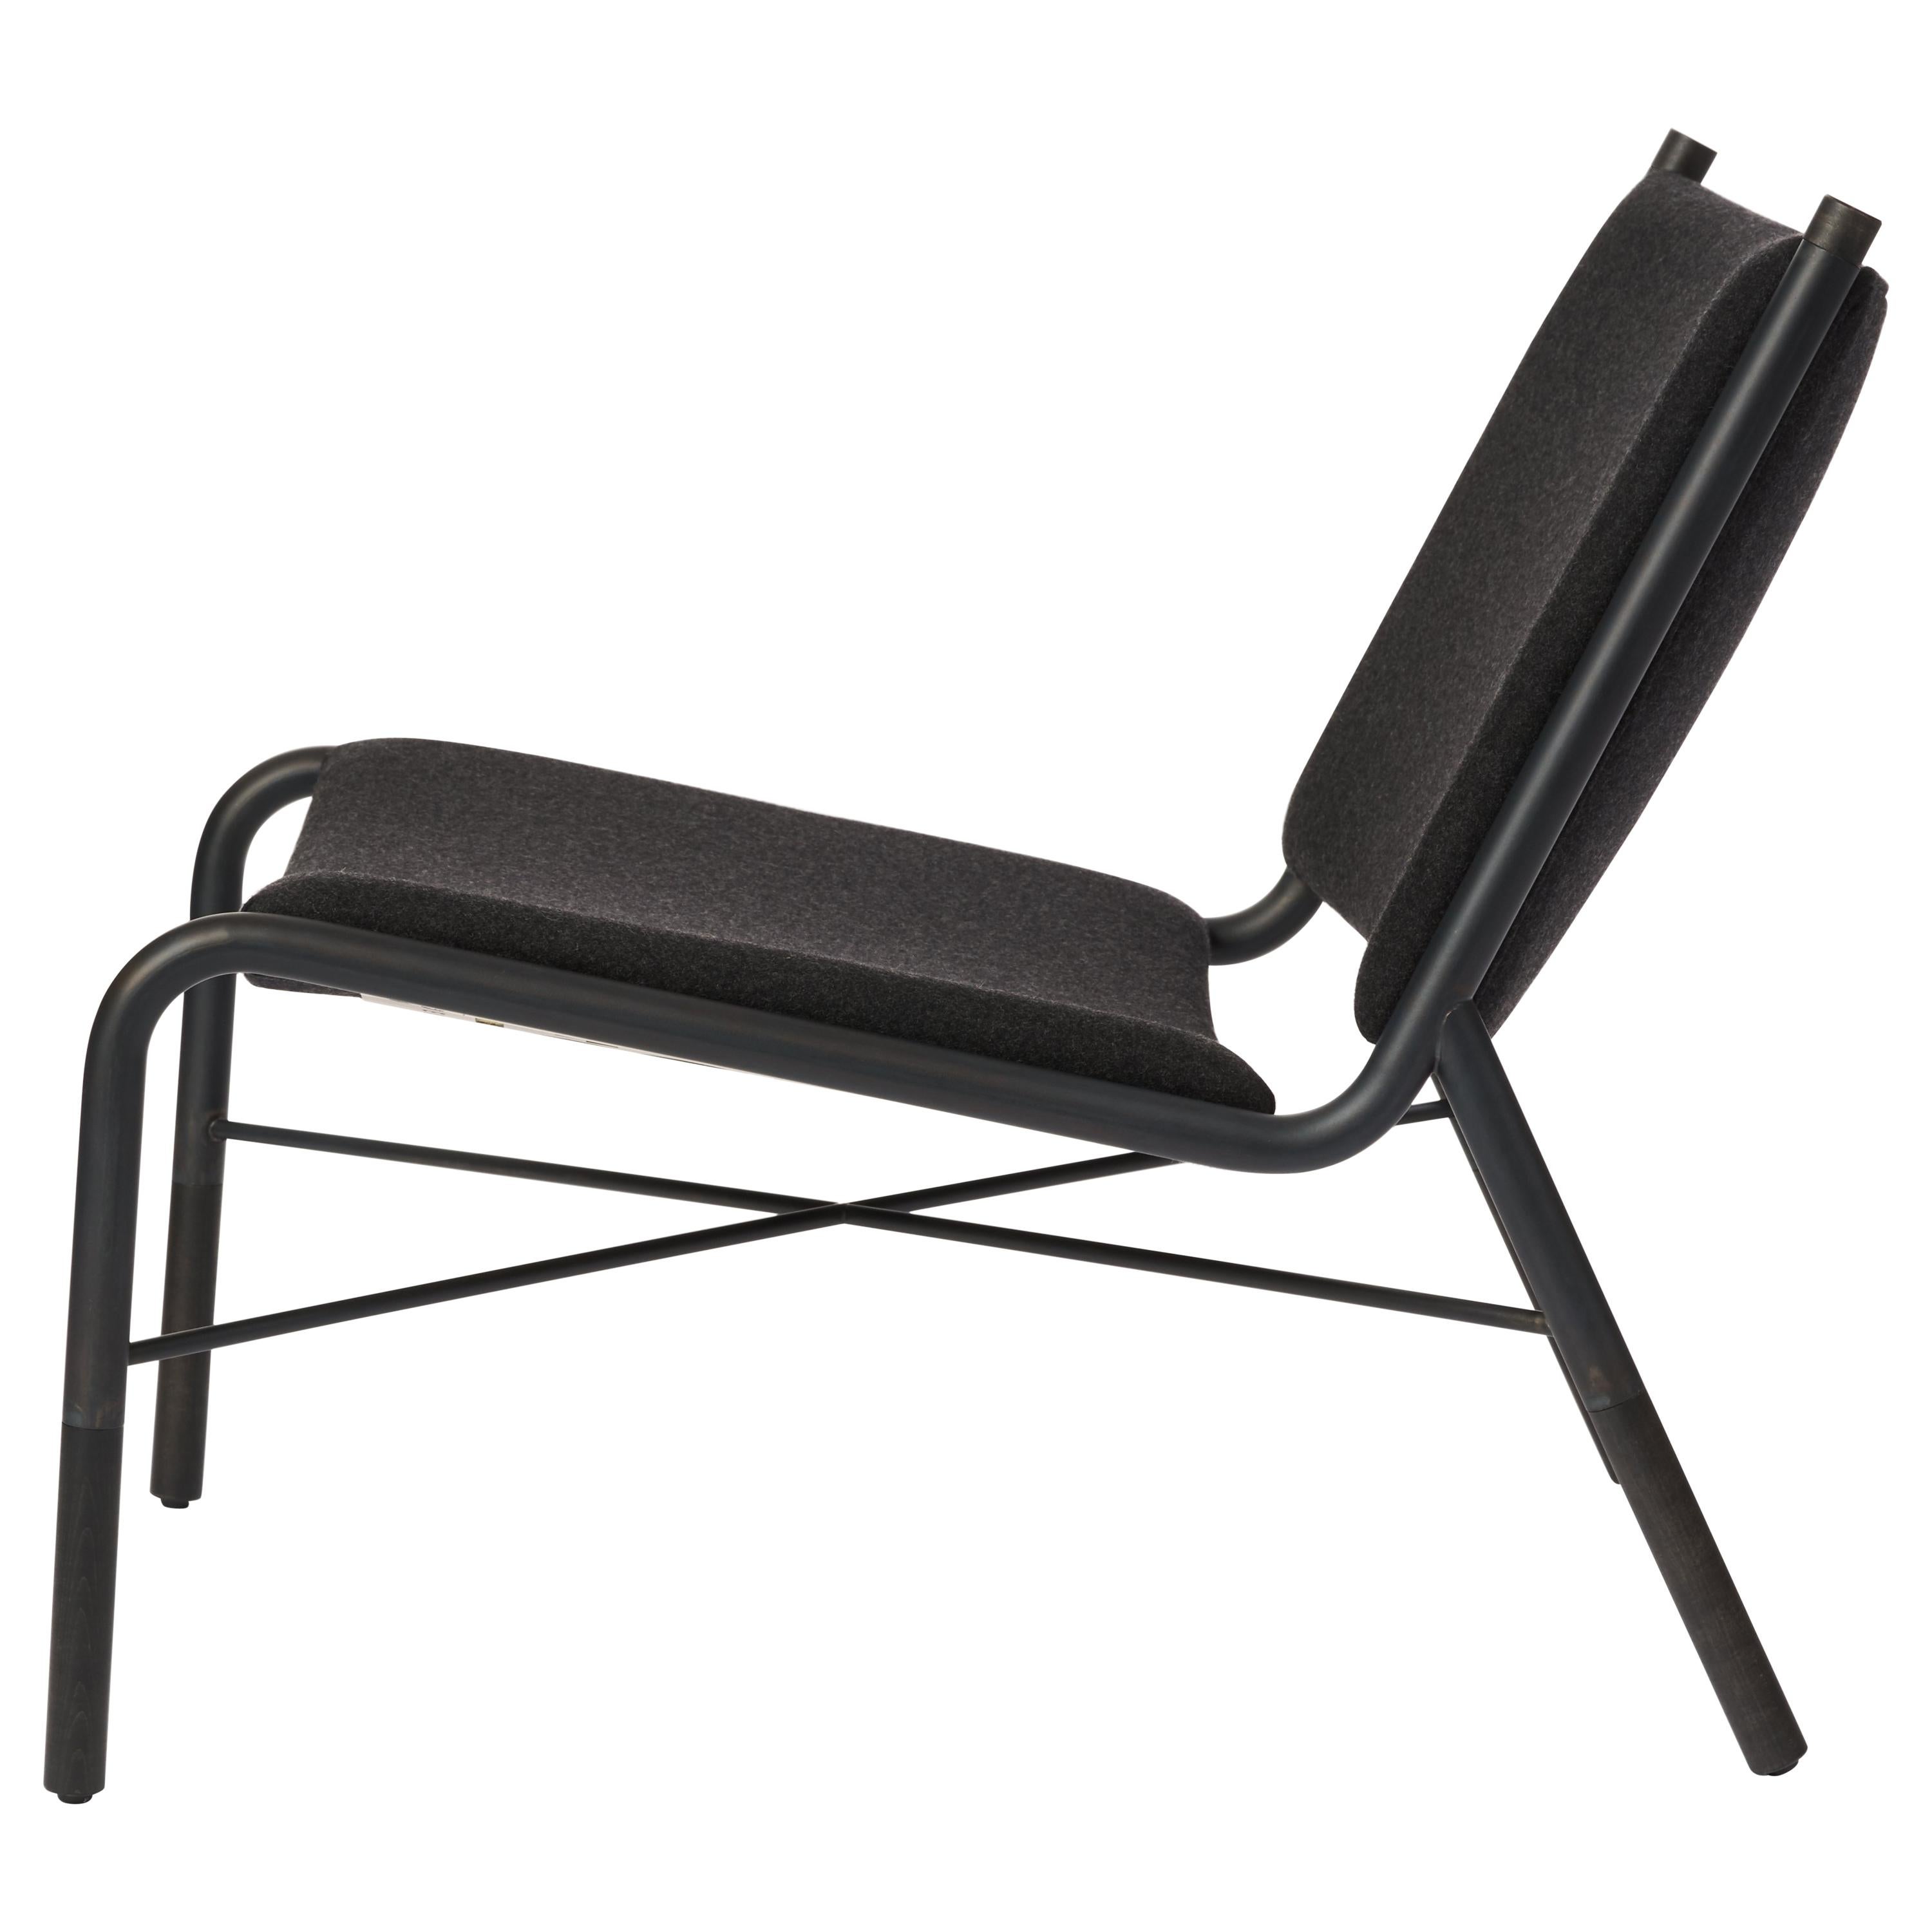 49N Lounge Chair, Melton Wool and Eco-Friendly Powder Coated Steel Frame For Sale